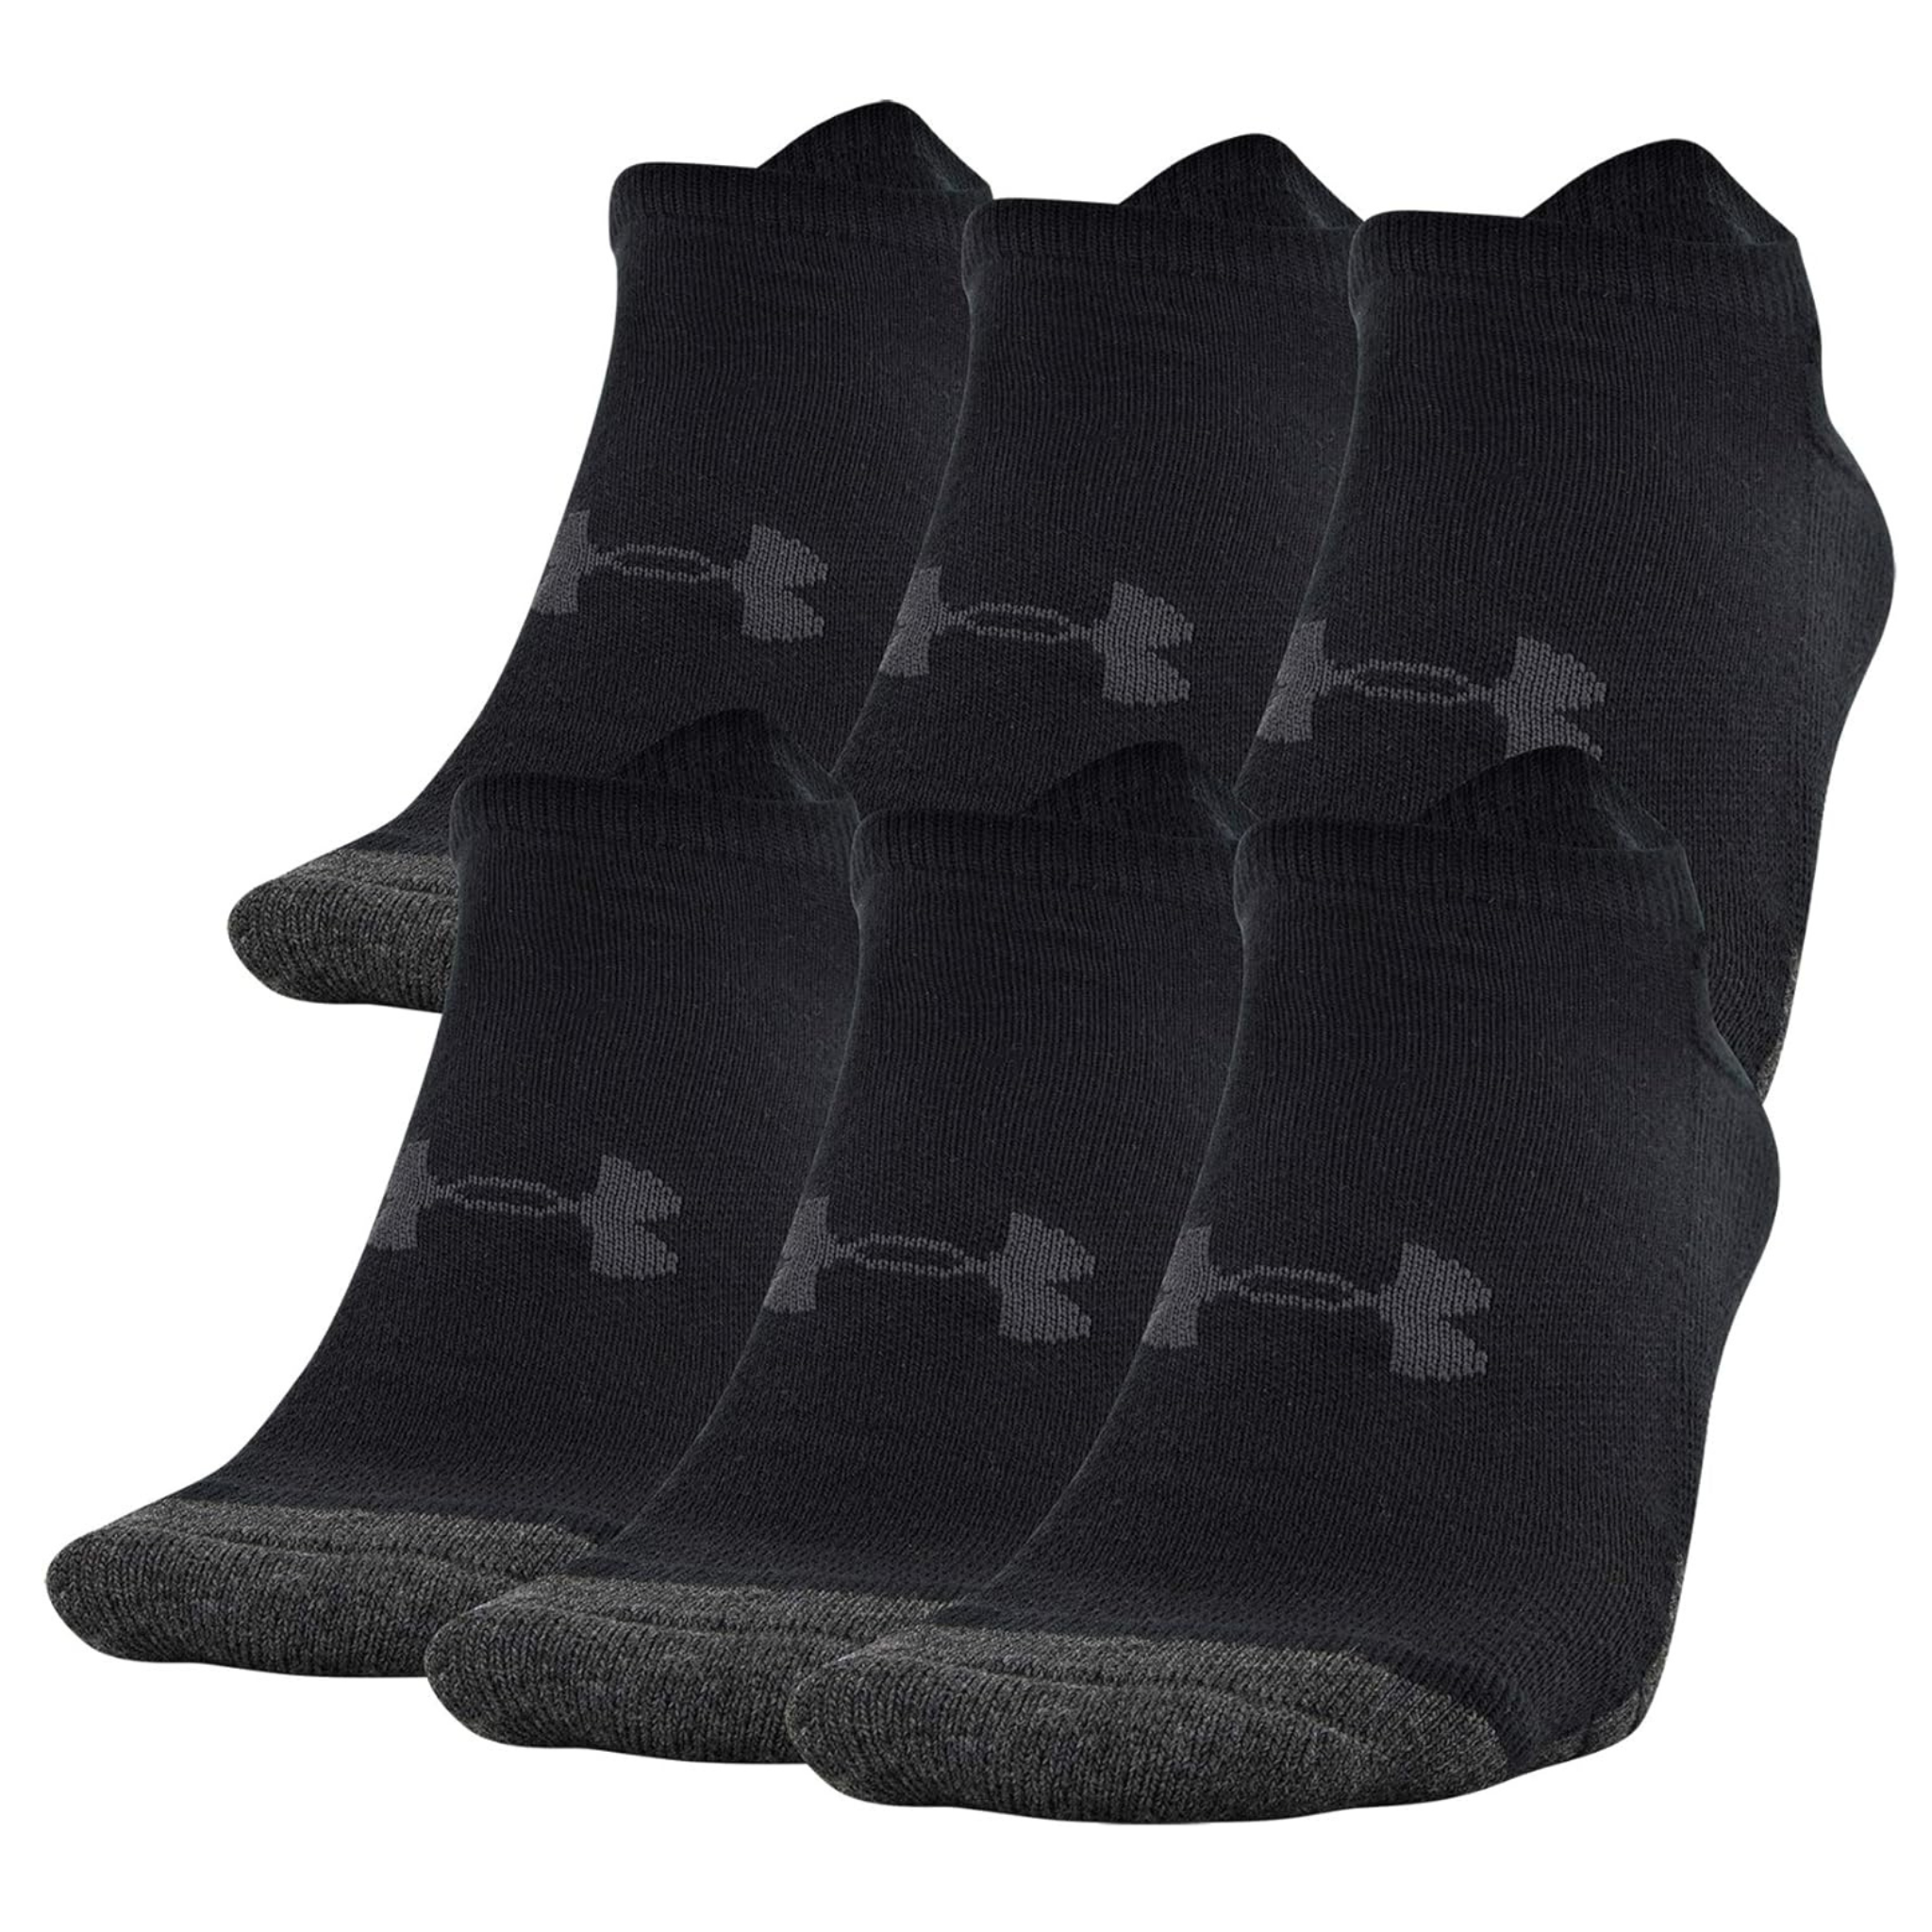 6-Pairs Under Armour Performance Tech No Show Socks